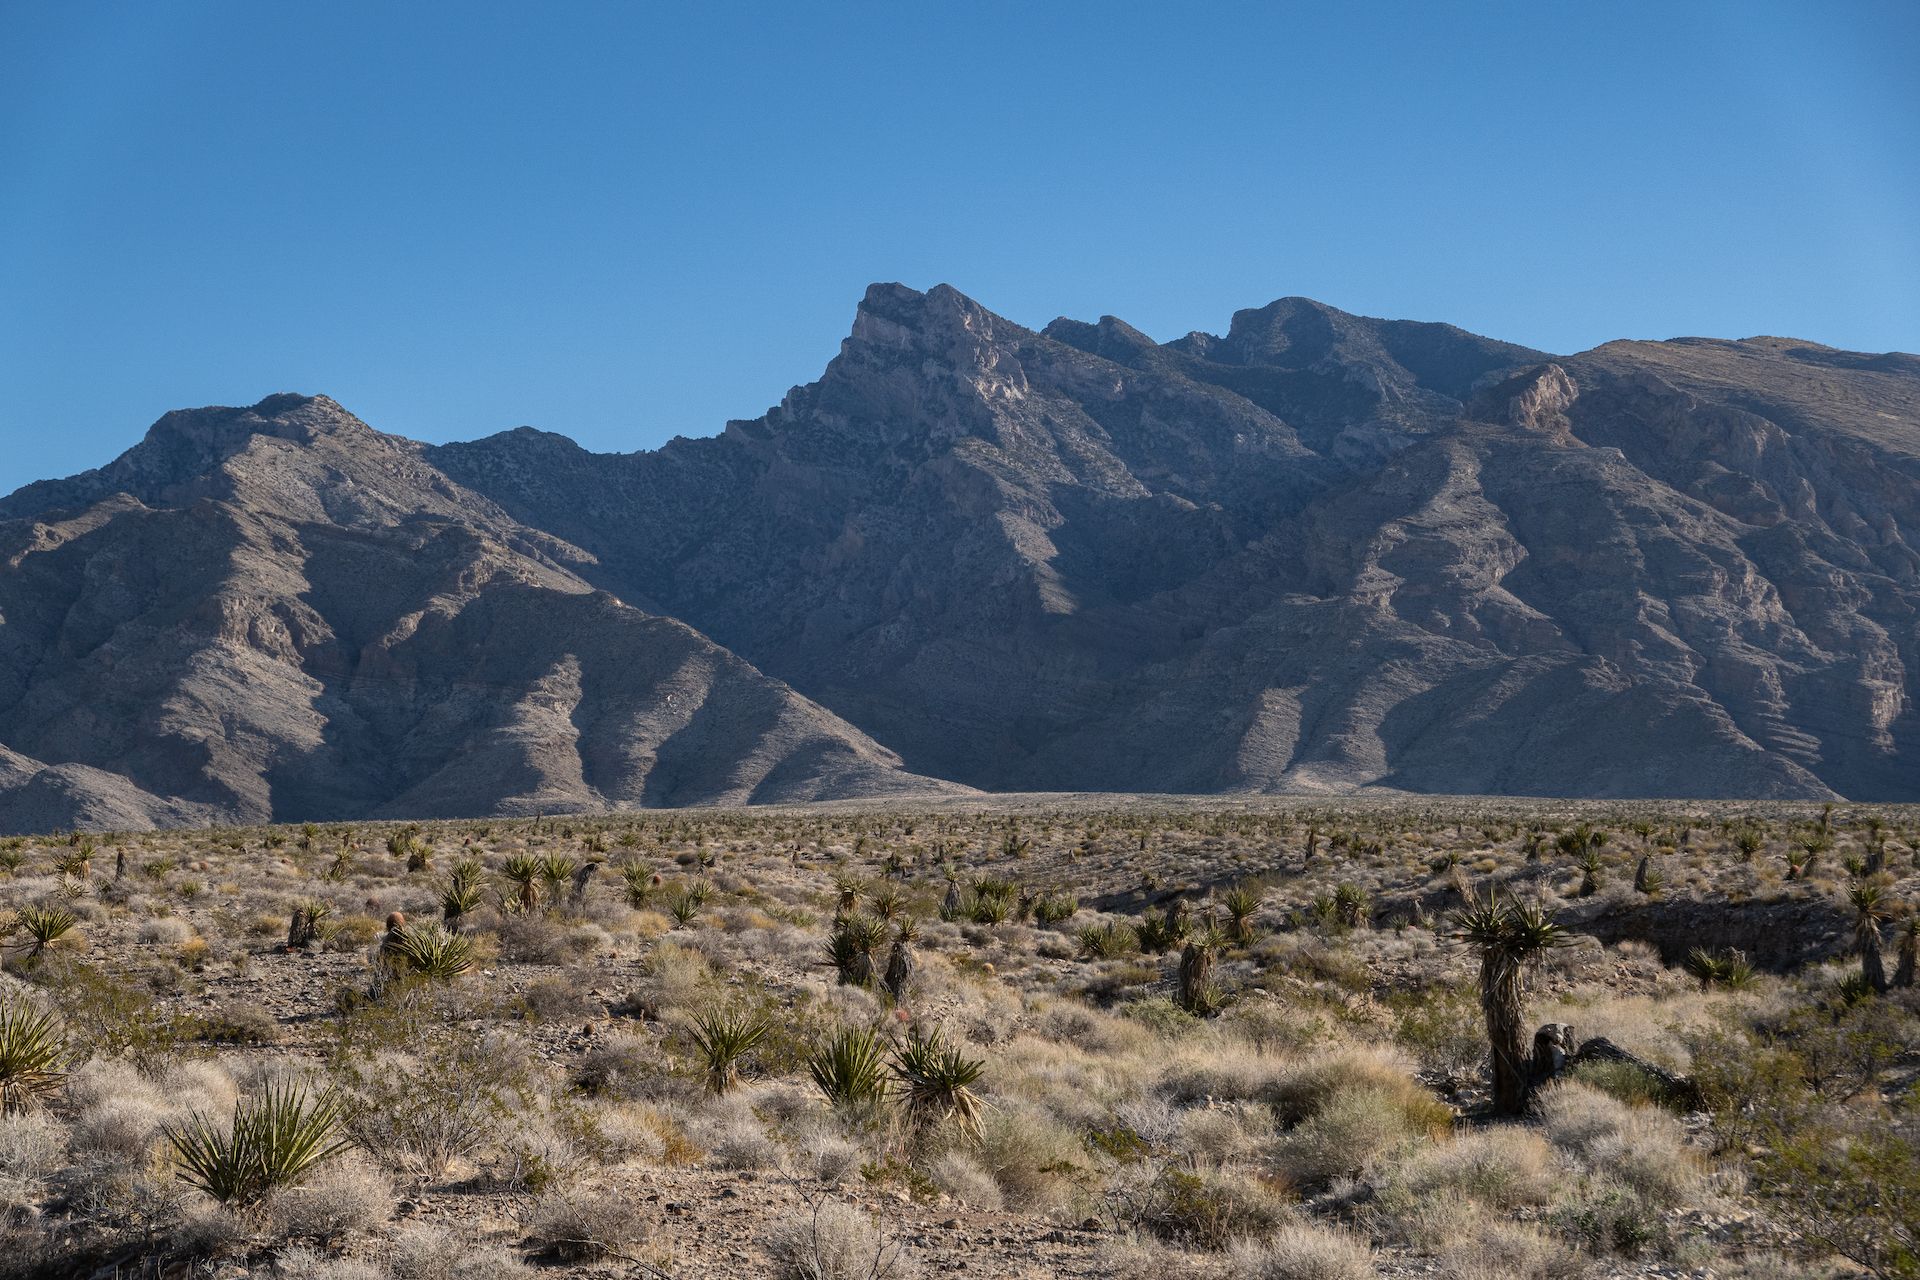 Virgin peak in the background and the bajada in the foreground.